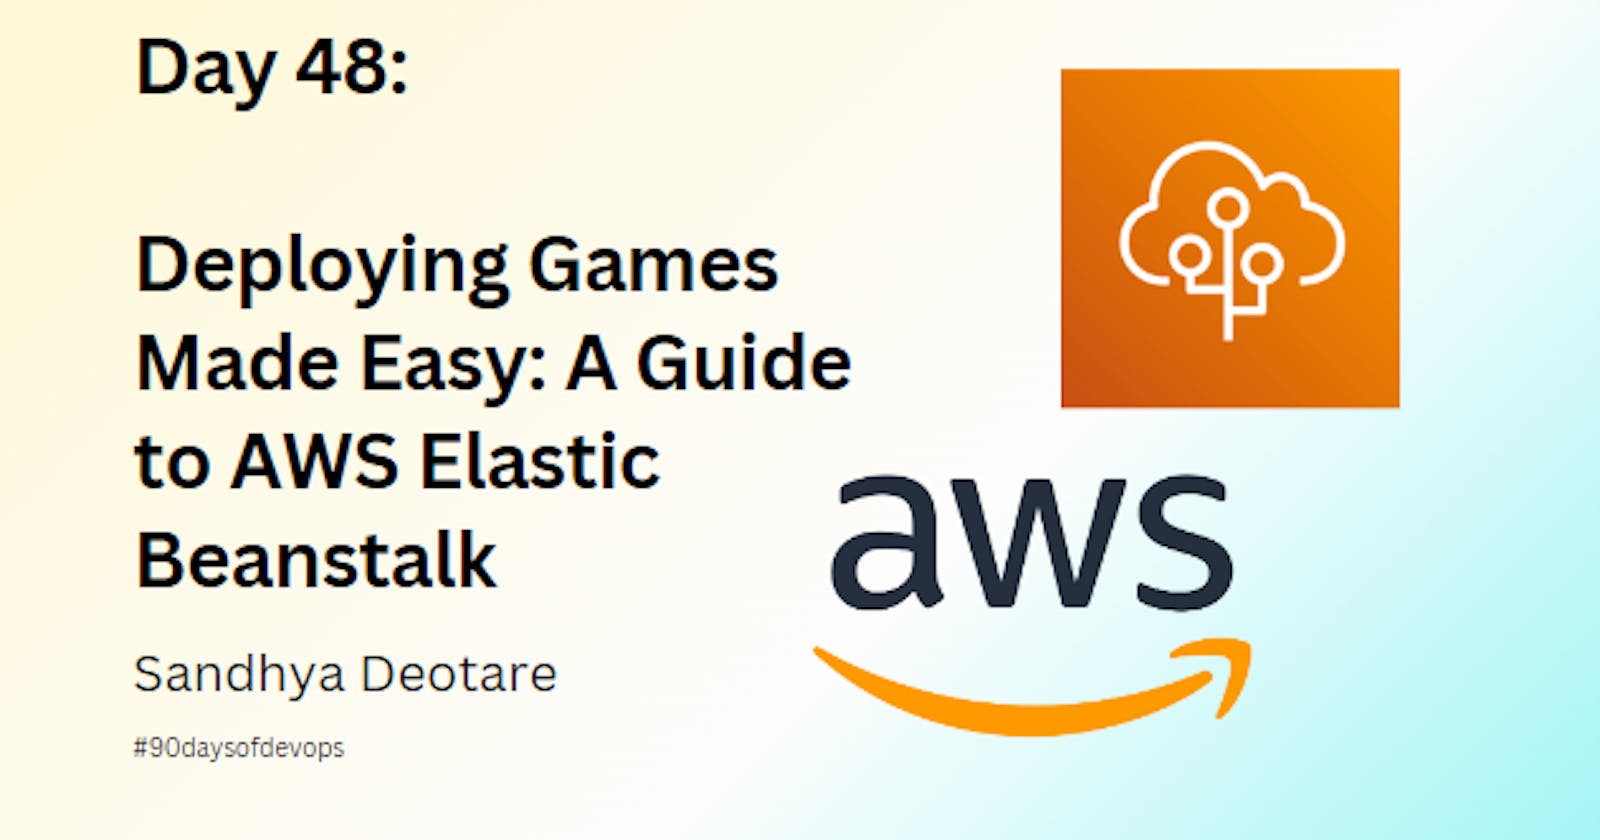 Deploying Games Made Easy: A Guide to AWS Elastic Beanstalk